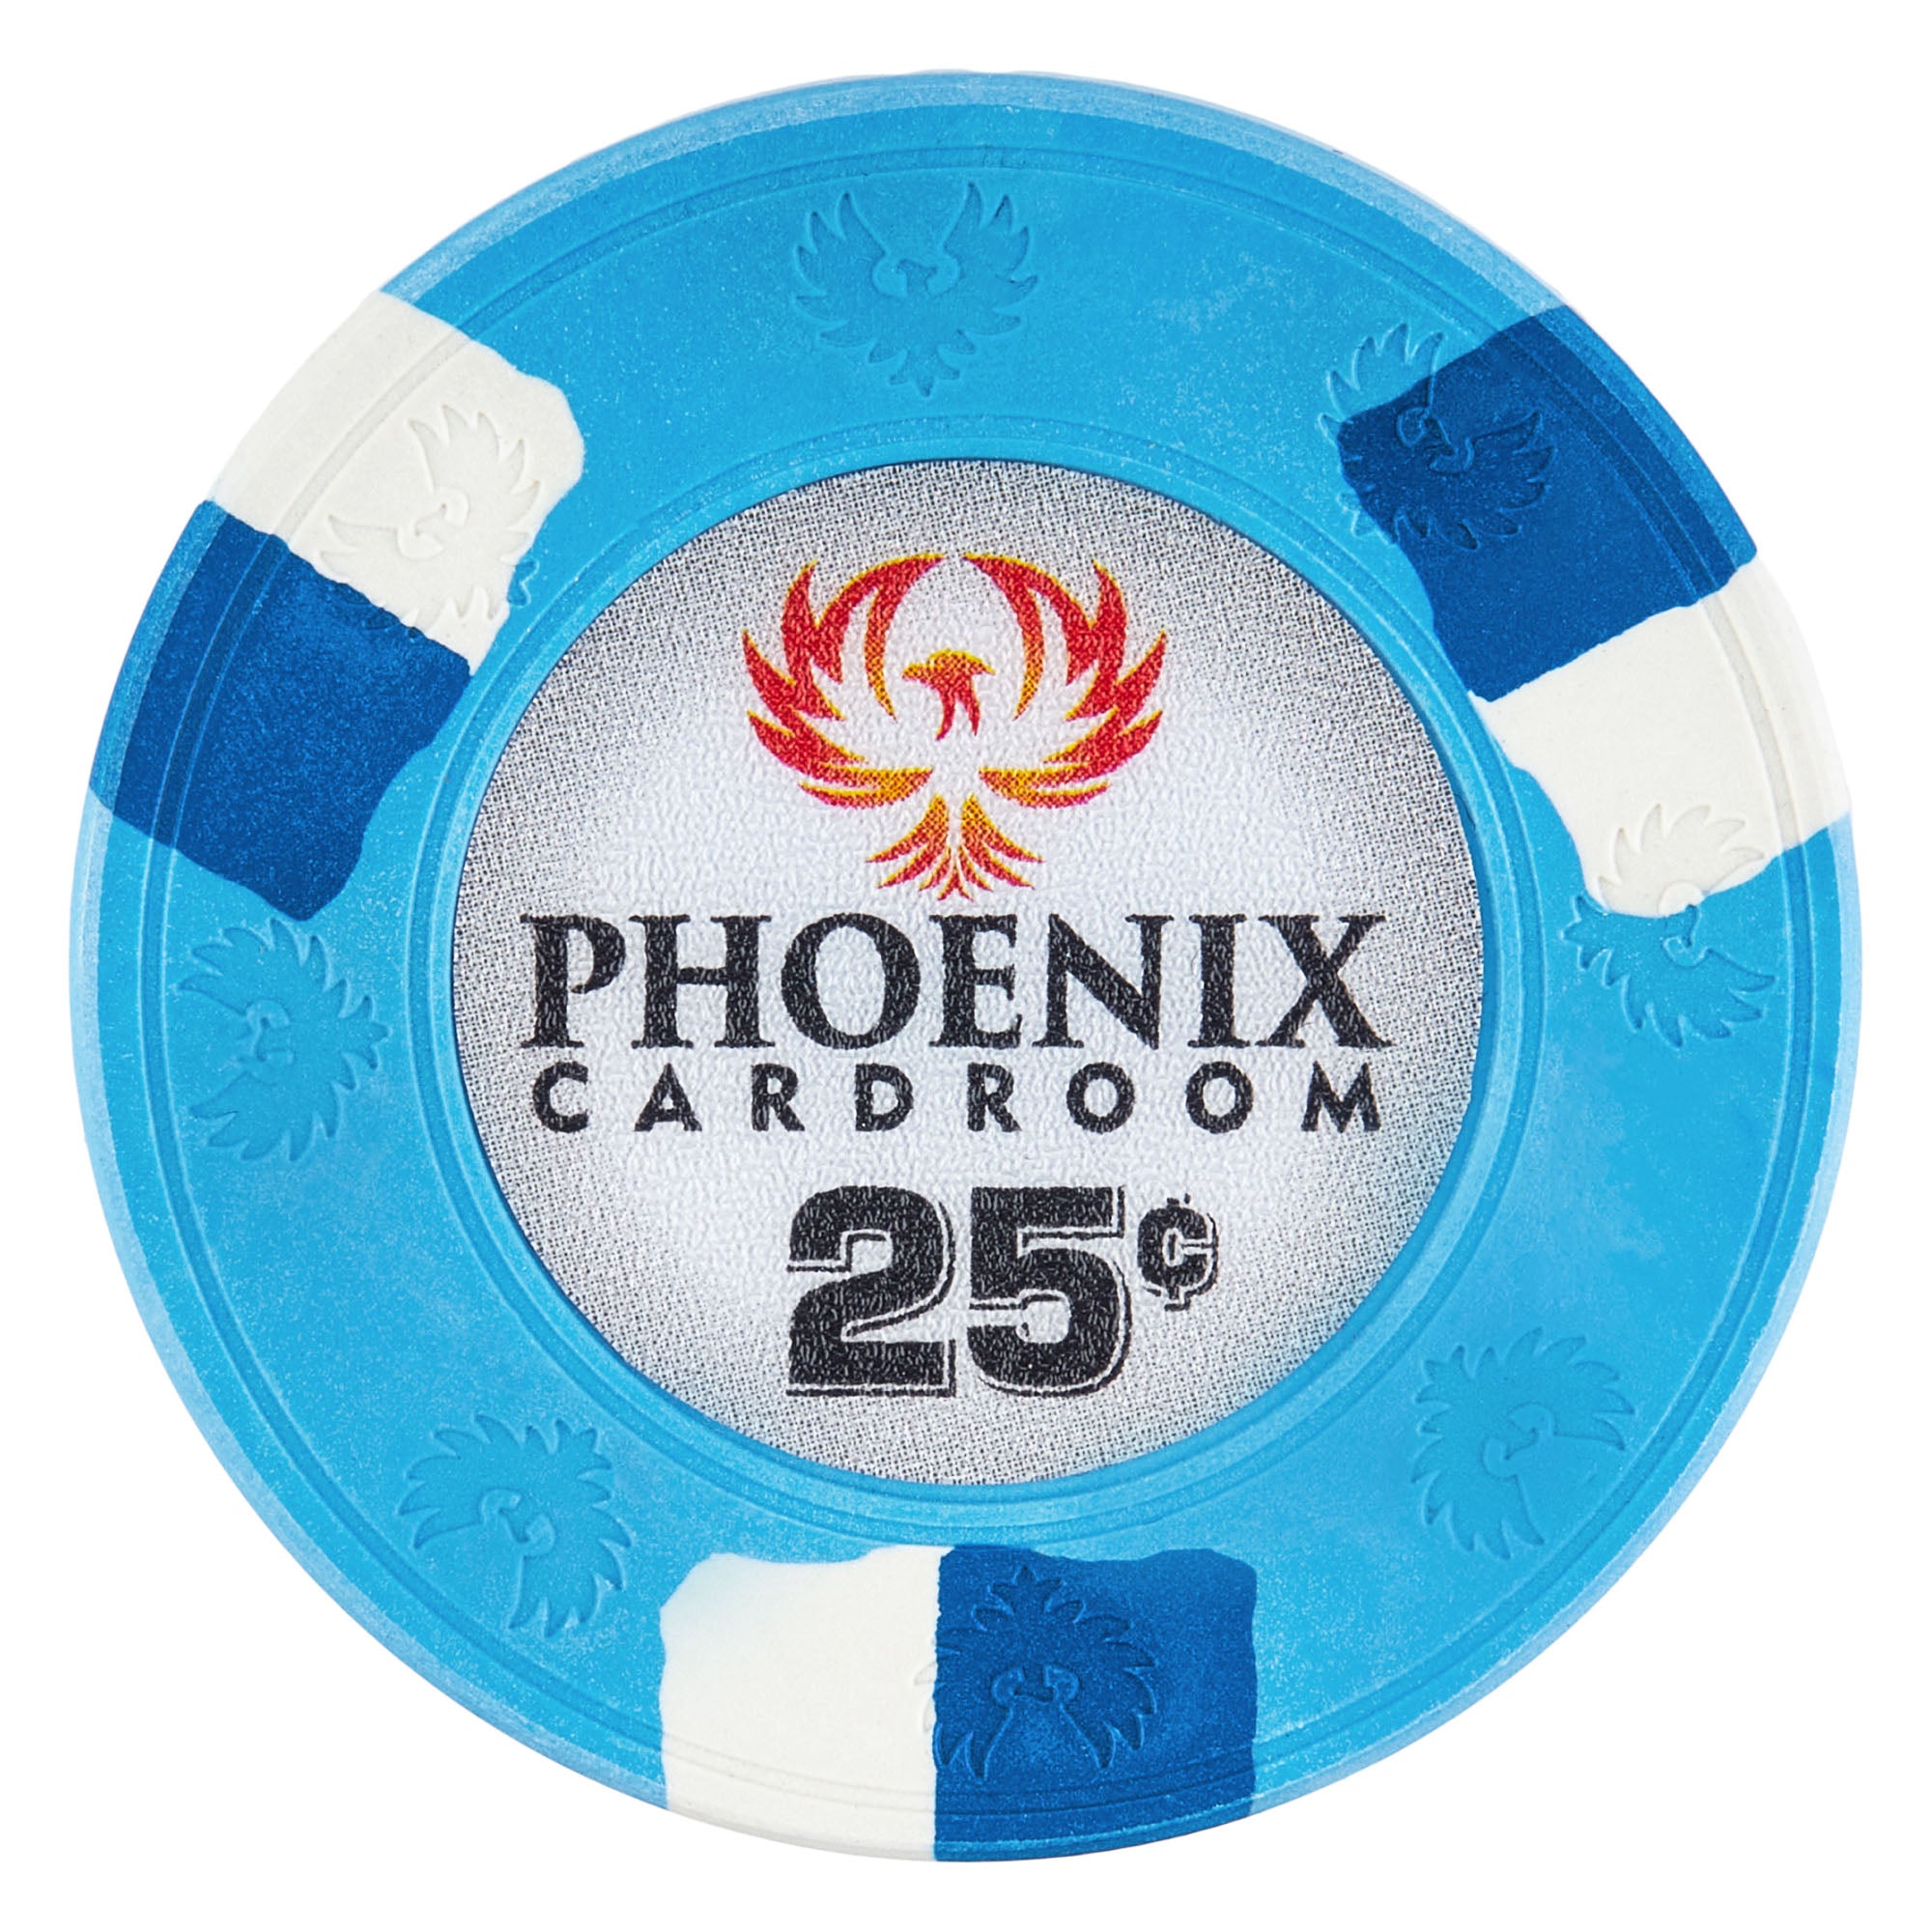 Phoenix 10-gram Real Clay Poker Chips (25-pack)